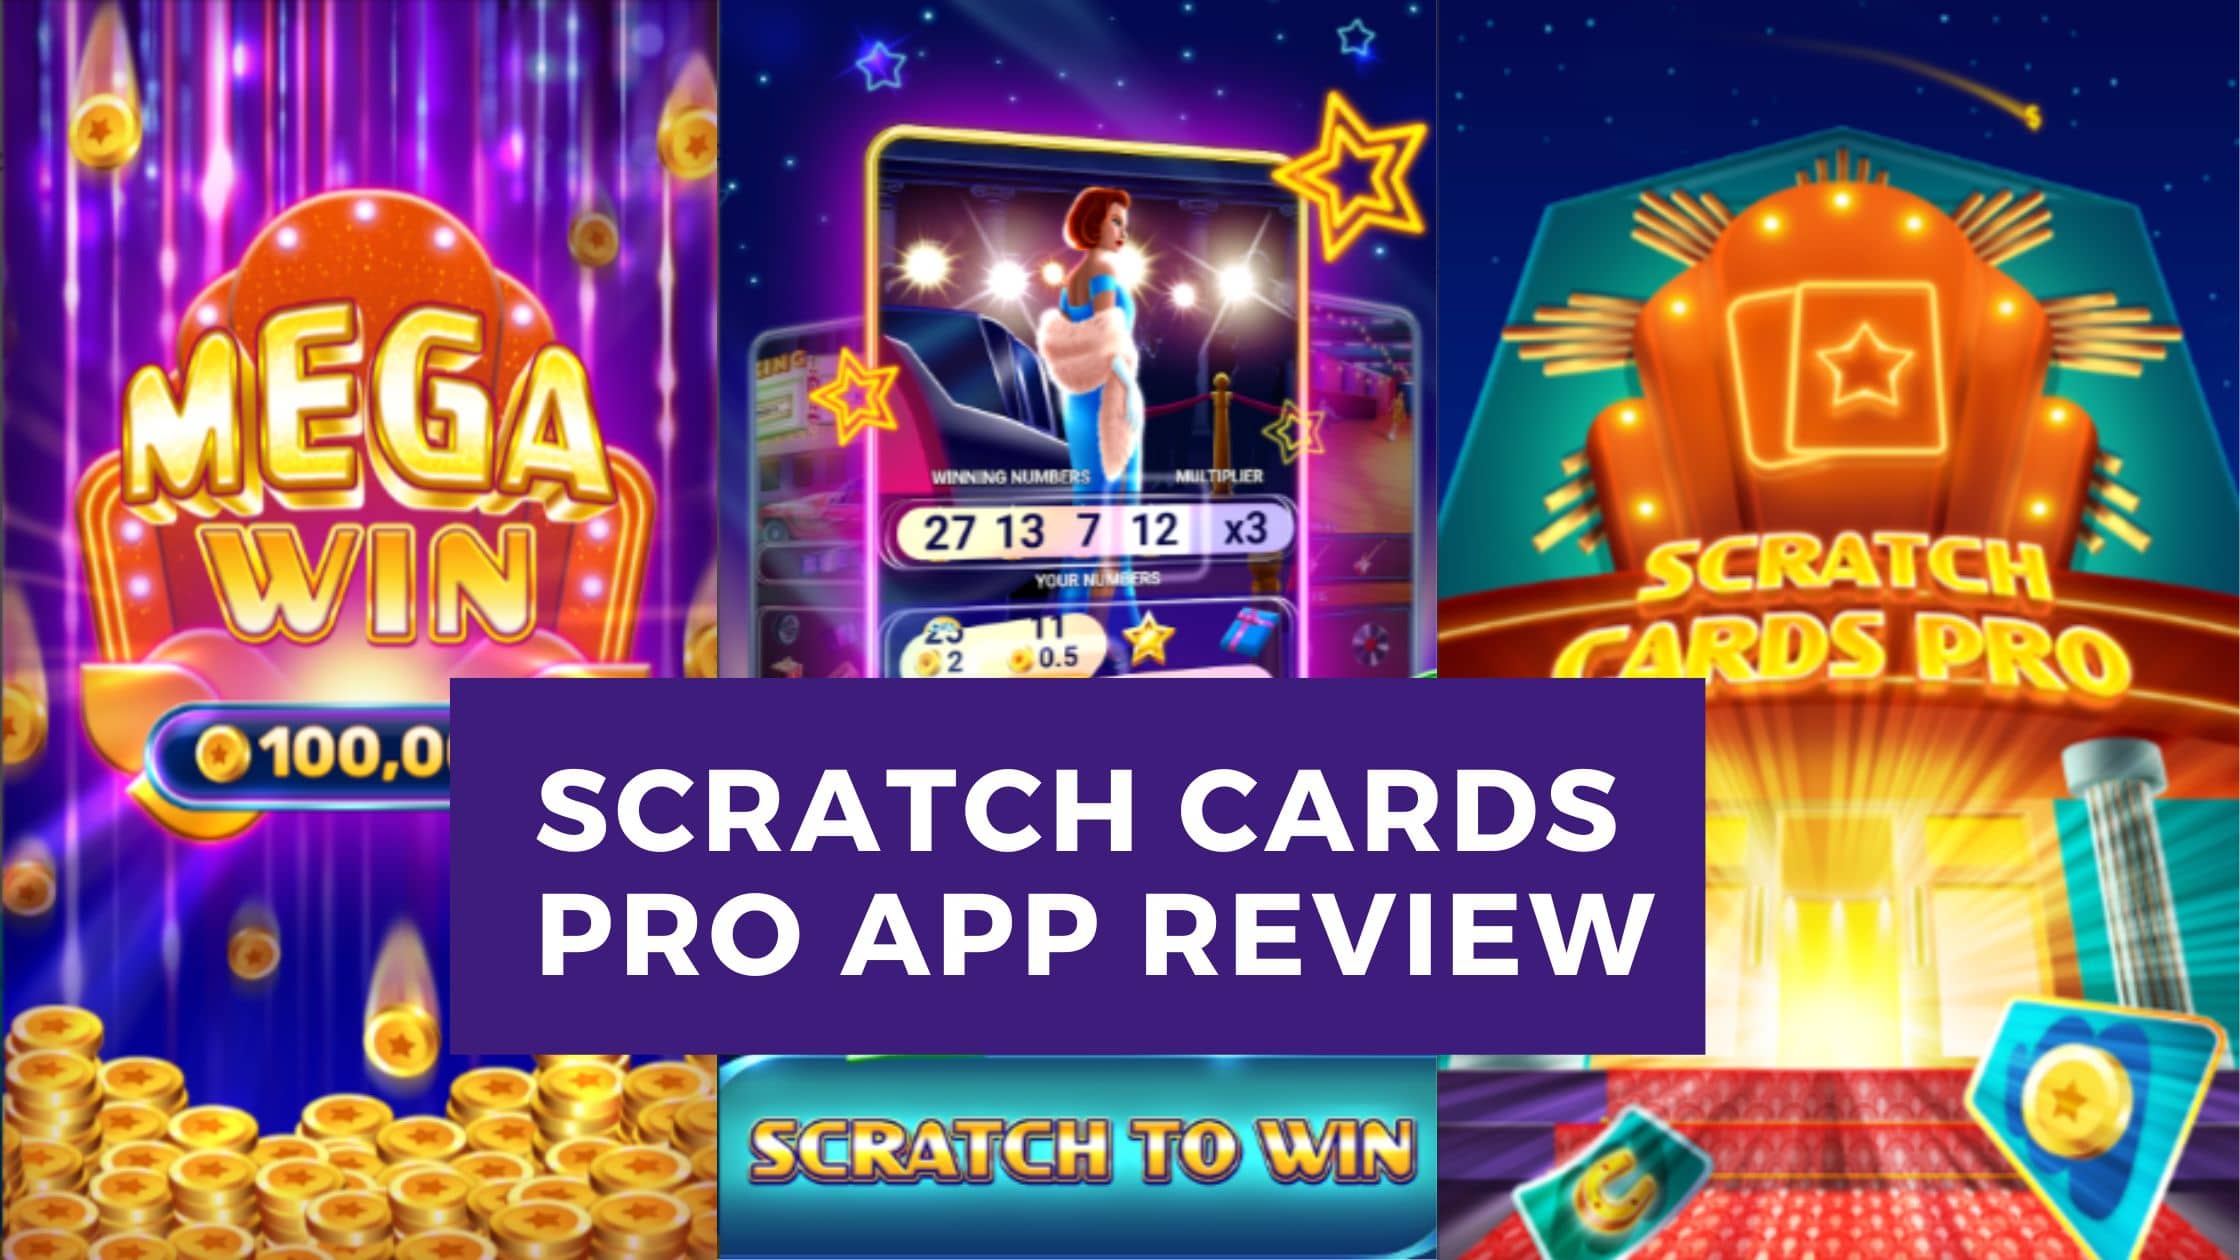 Scratch Cards Pro App Review